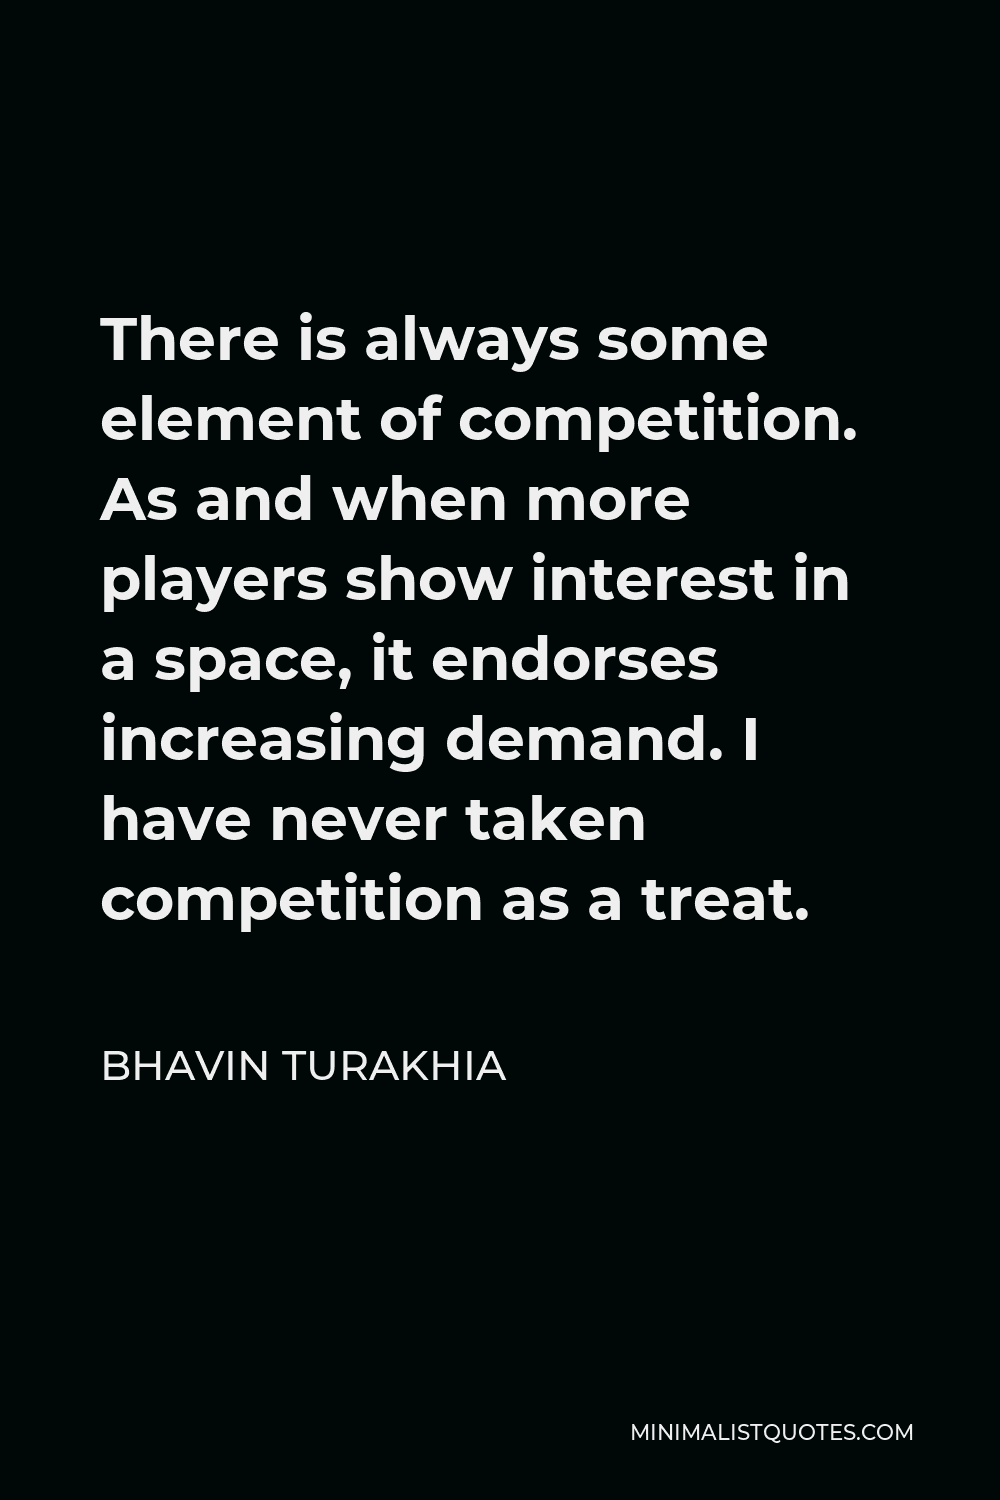 Bhavin Turakhia Quote - There is always some element of competition. As and when more players show interest in a space, it endorses increasing demand. I have never taken competition as a treat.